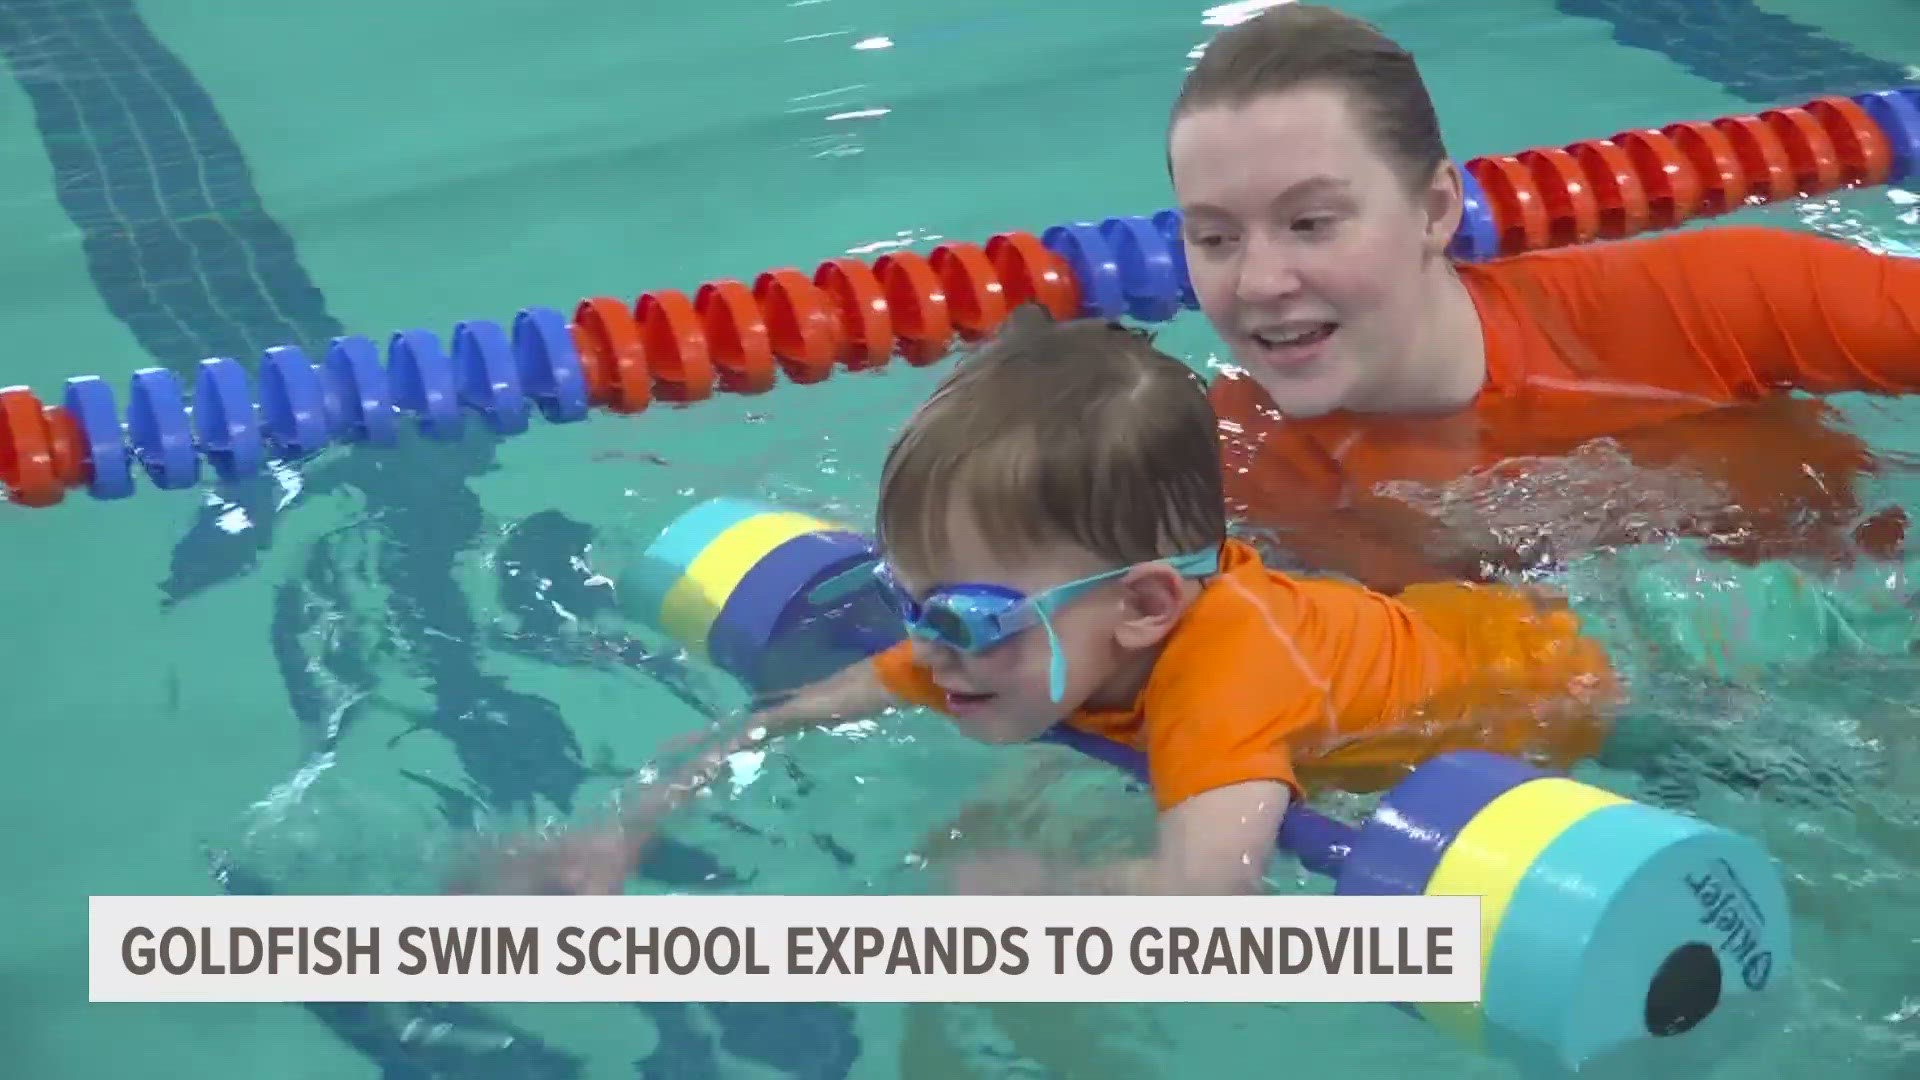 While the main focus is always safety, Mark Biebuyck with Goldfish Swim School said the instructors also aim to make the experience fun for kids.